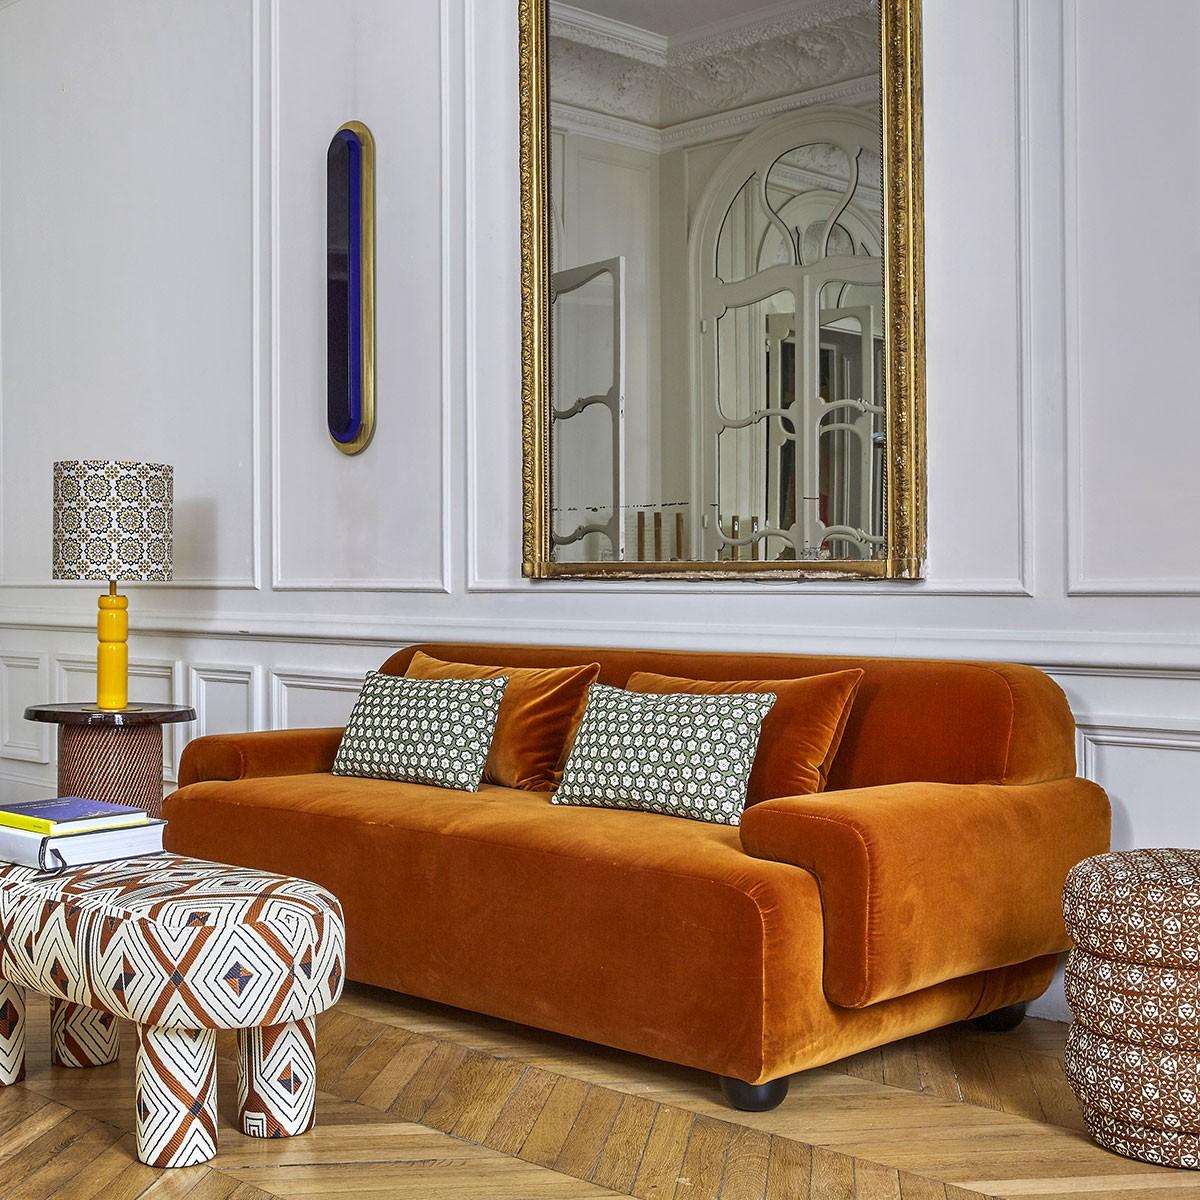 Popus Editions Lena 3-seater sofa in Apricot cork Linen Upholstery

It looks like it's straight out of a movie, with its generous curves and wide armrests. It is a real invitation to spend long Sundays with the family, comfortably seated in front